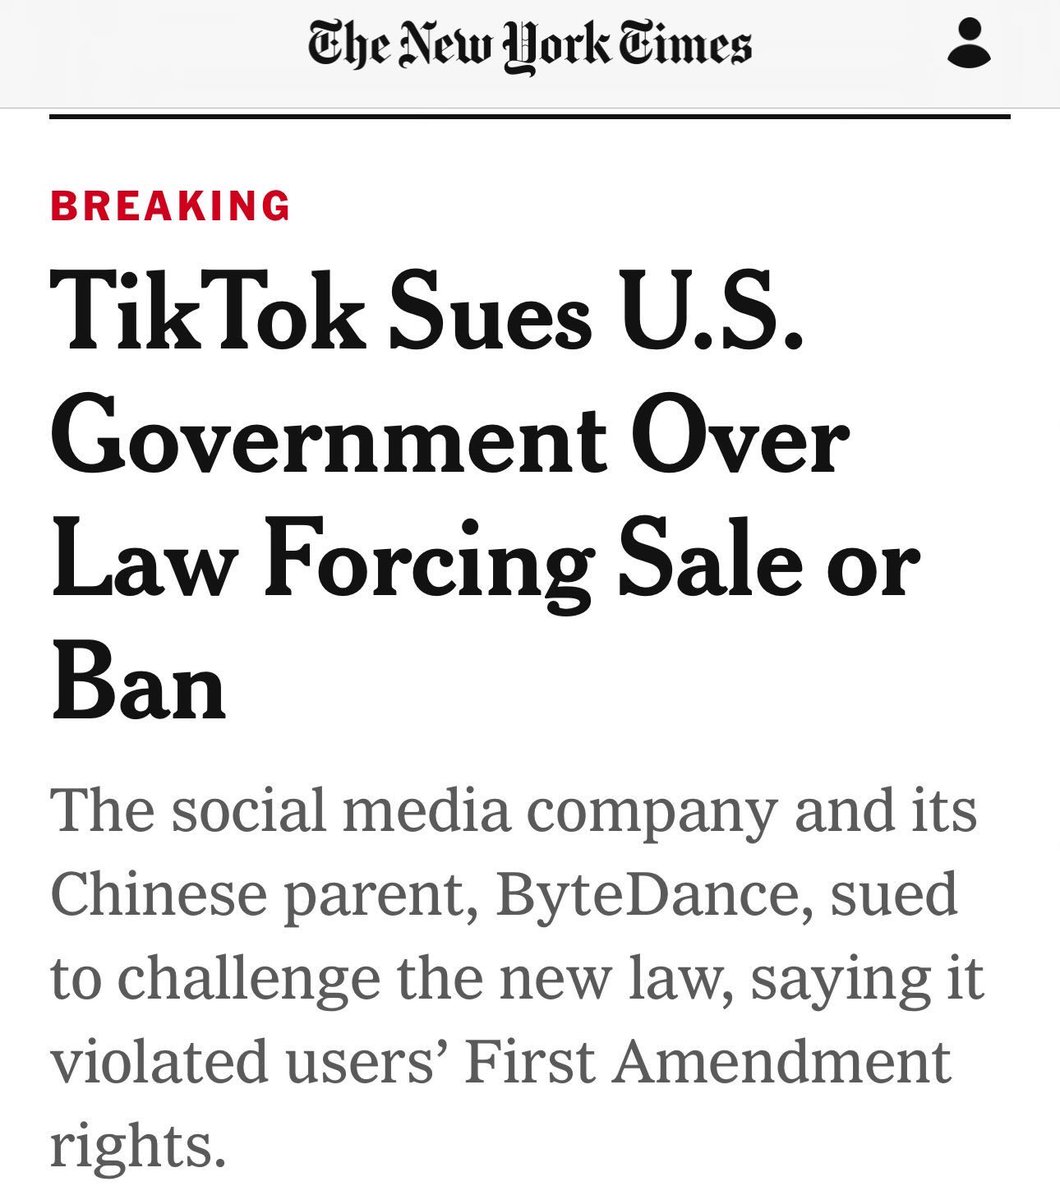 Every single American company must bend to the Chinese communist government’s will to operate in China. I voted yes to force this sale to make TikTok safer for our children and national security. Their arrogance is astounding.